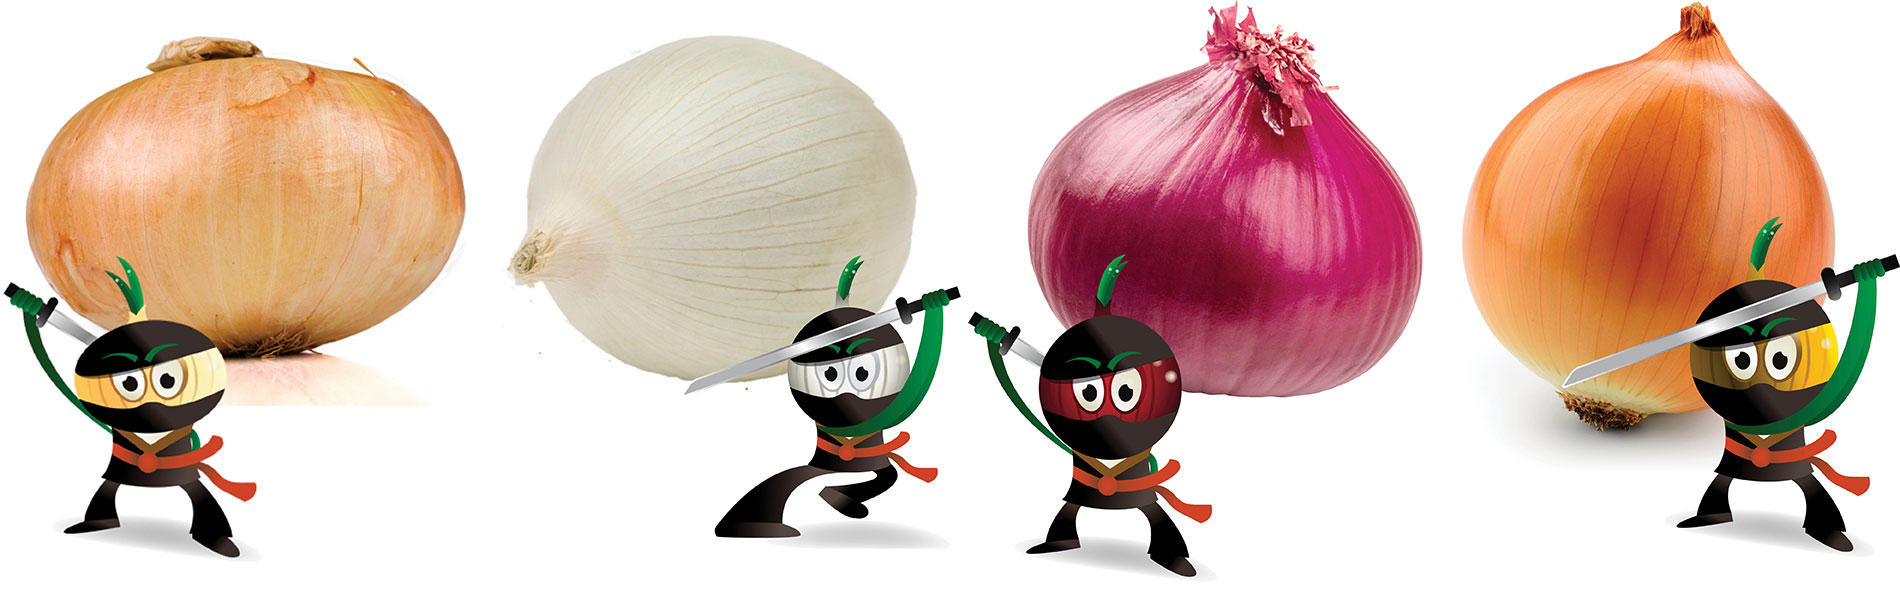 Nature's Ninjas with colors of onions on white background